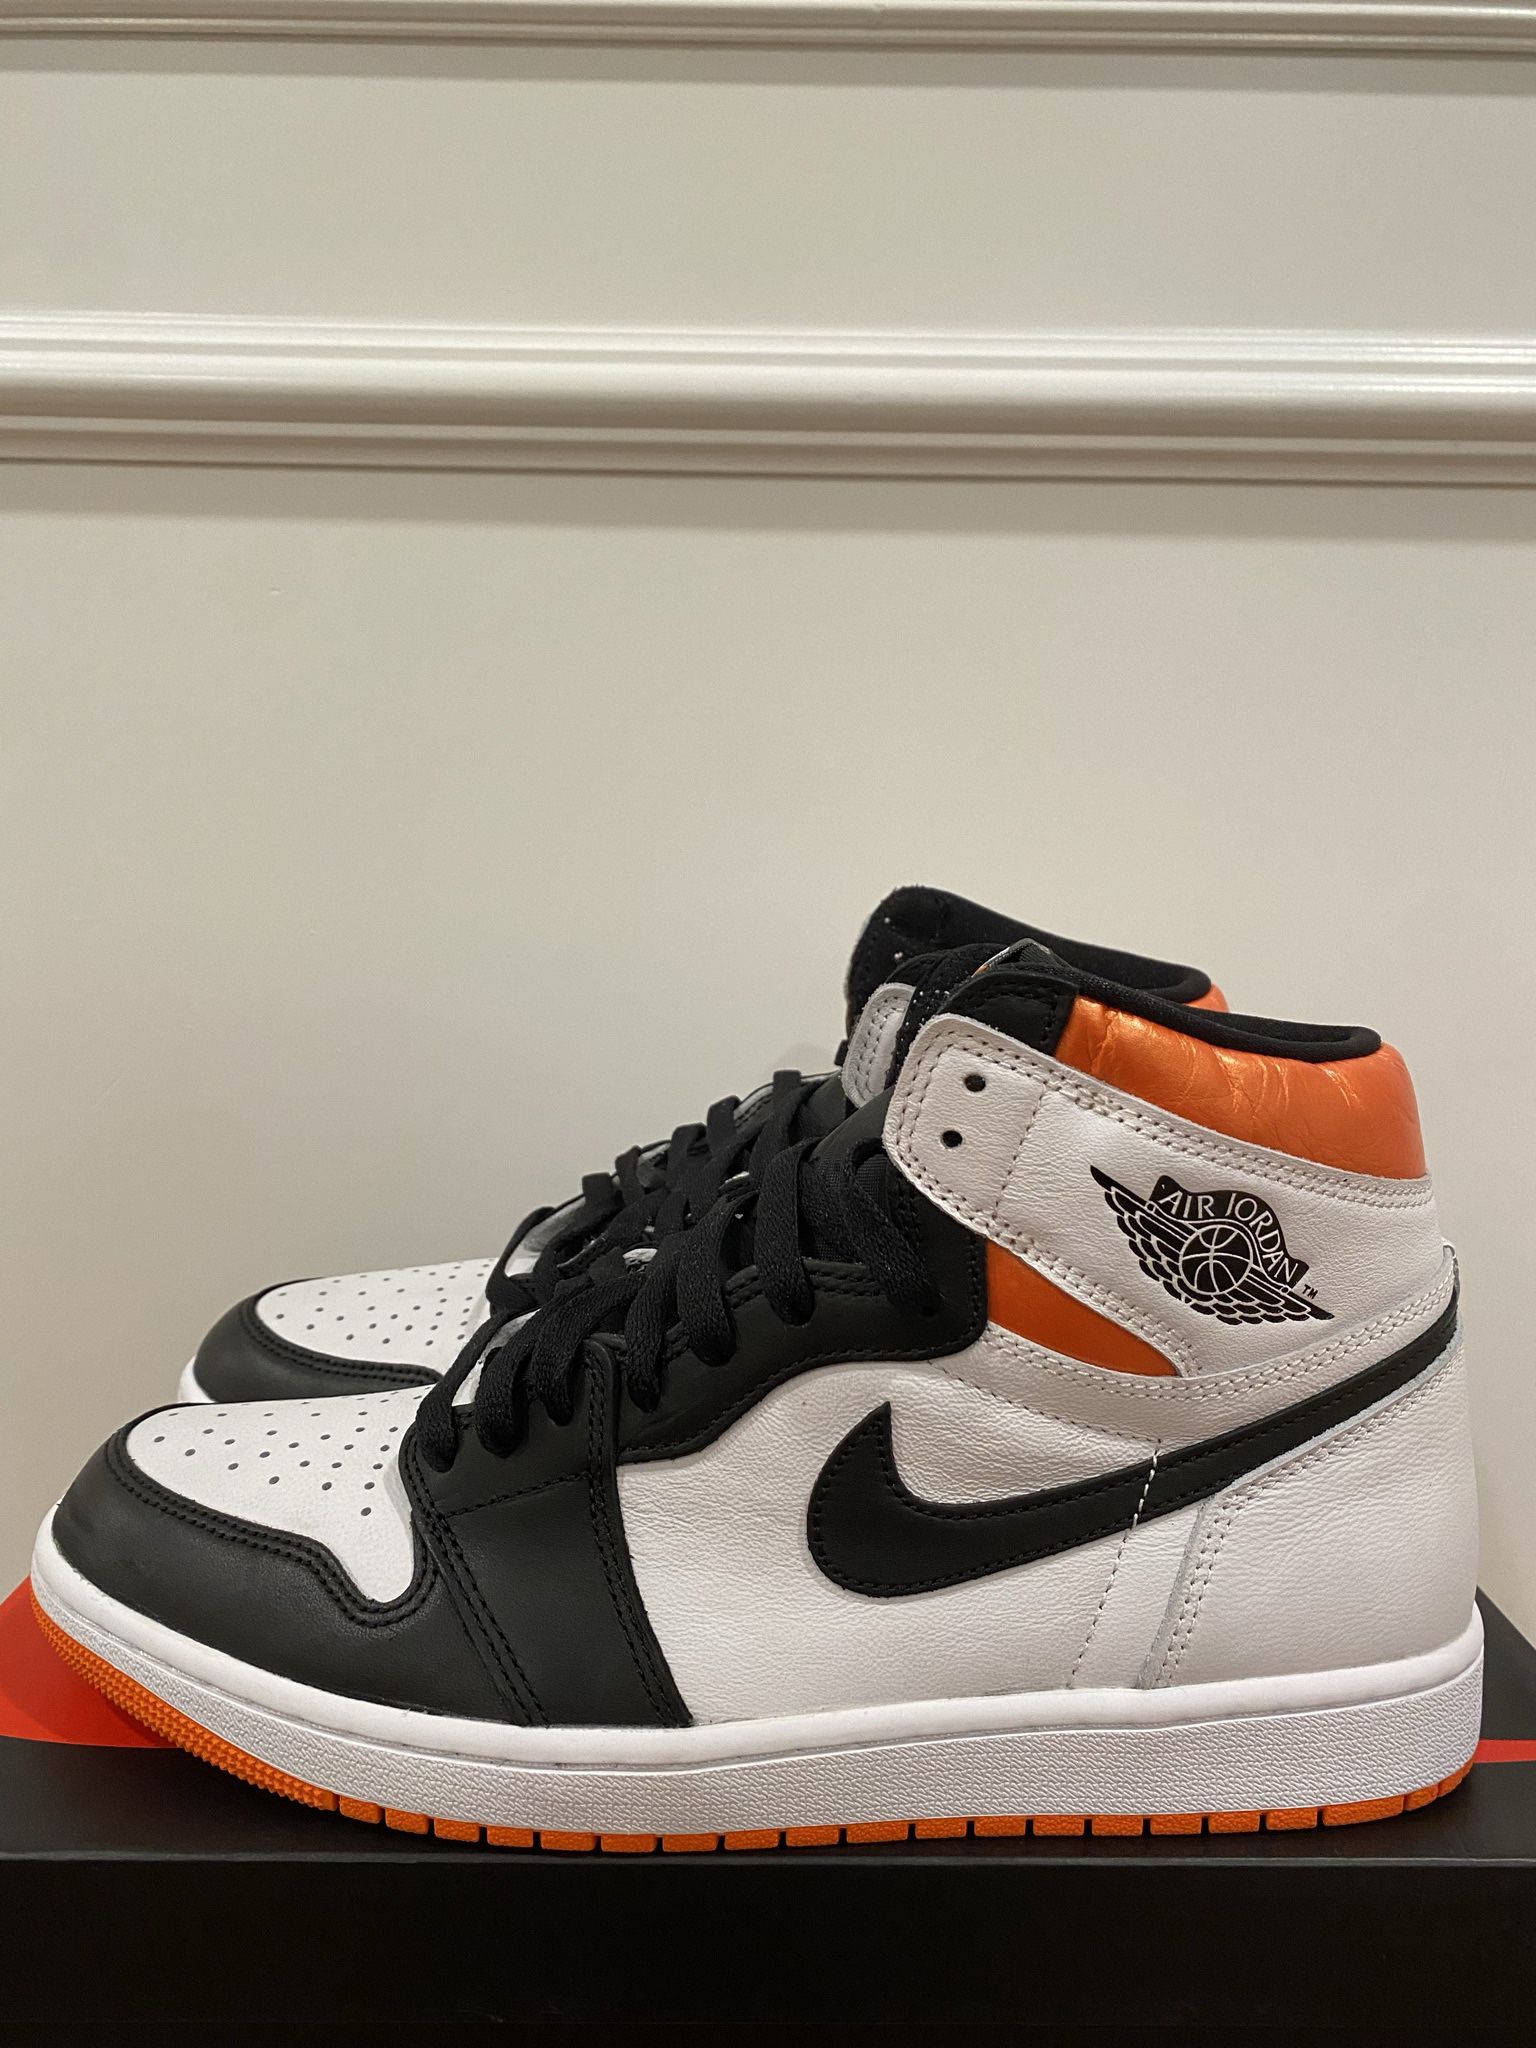 Jordan 1 High “Electro Orange” Size 10.5 Never tried on but put on The Laces Og All